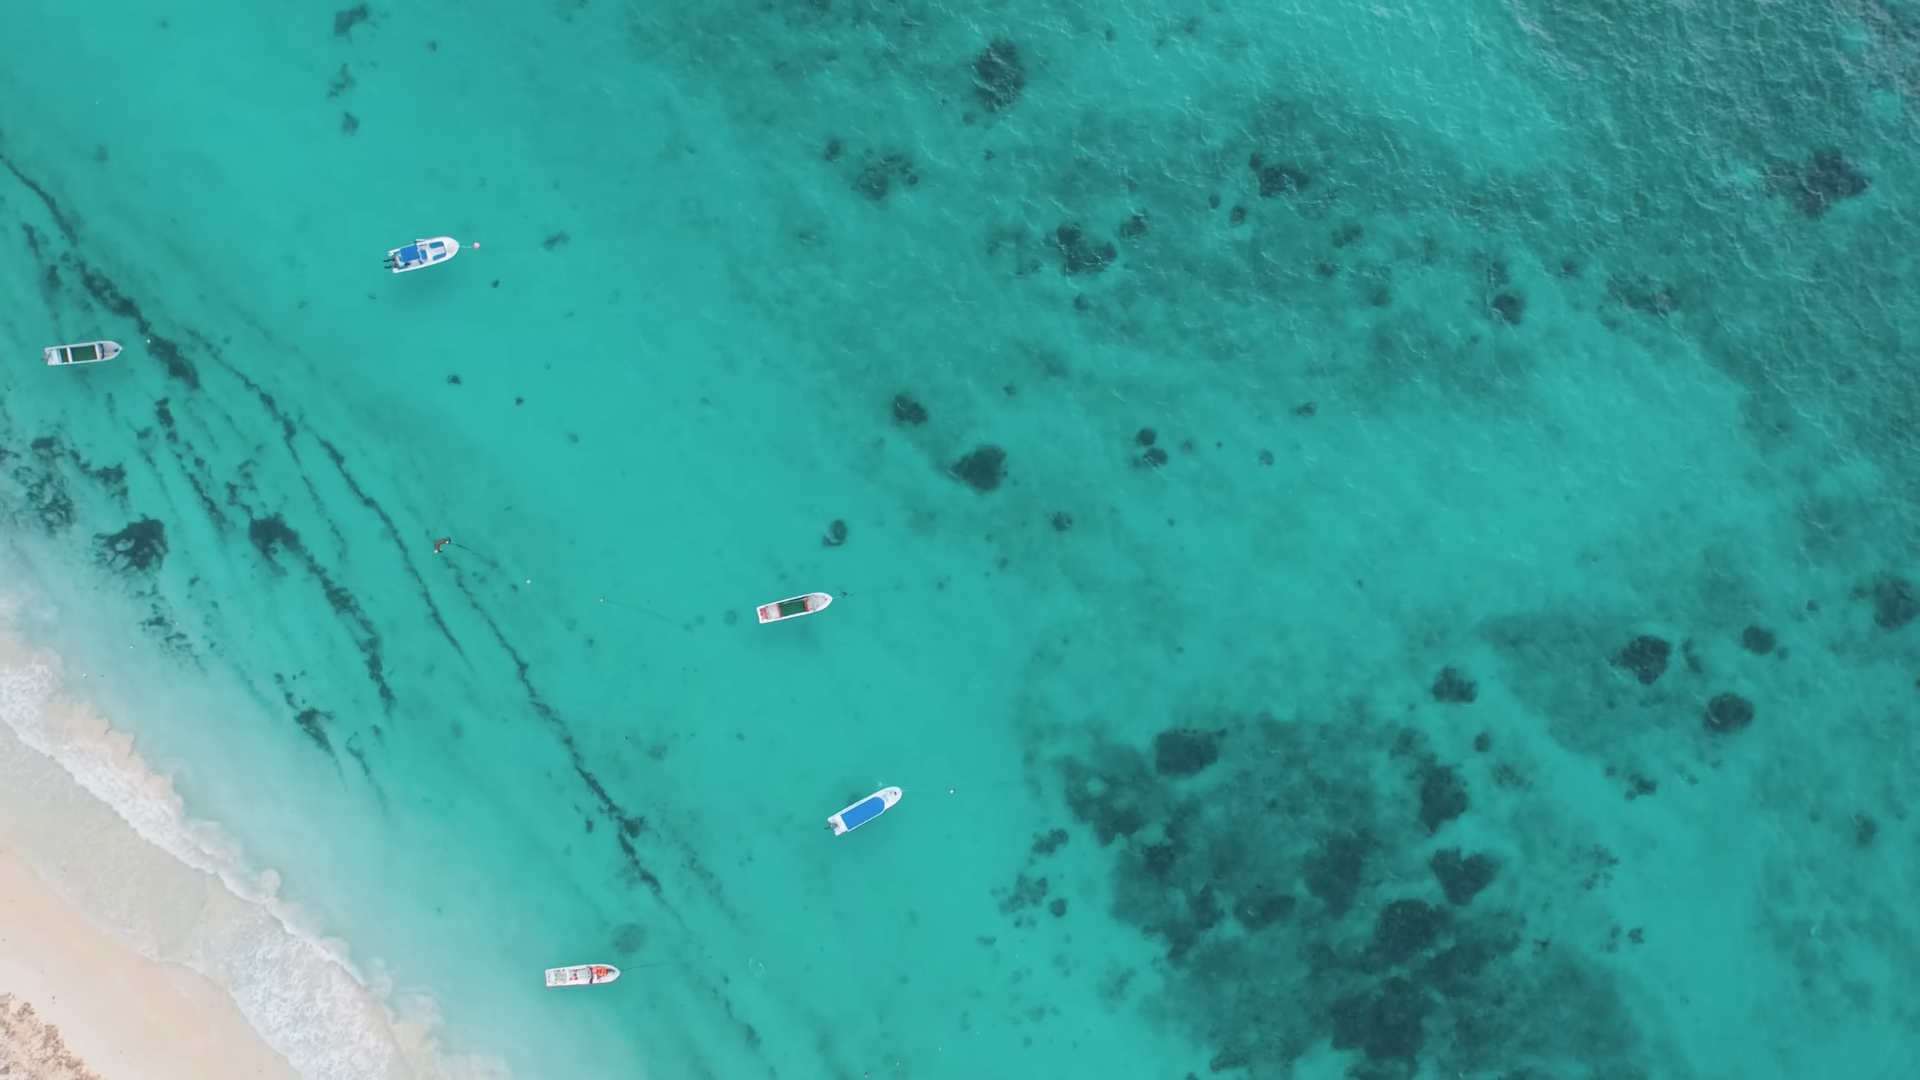 General 1920x1080 boat sea beach water turquoise aerial view nature vehicle